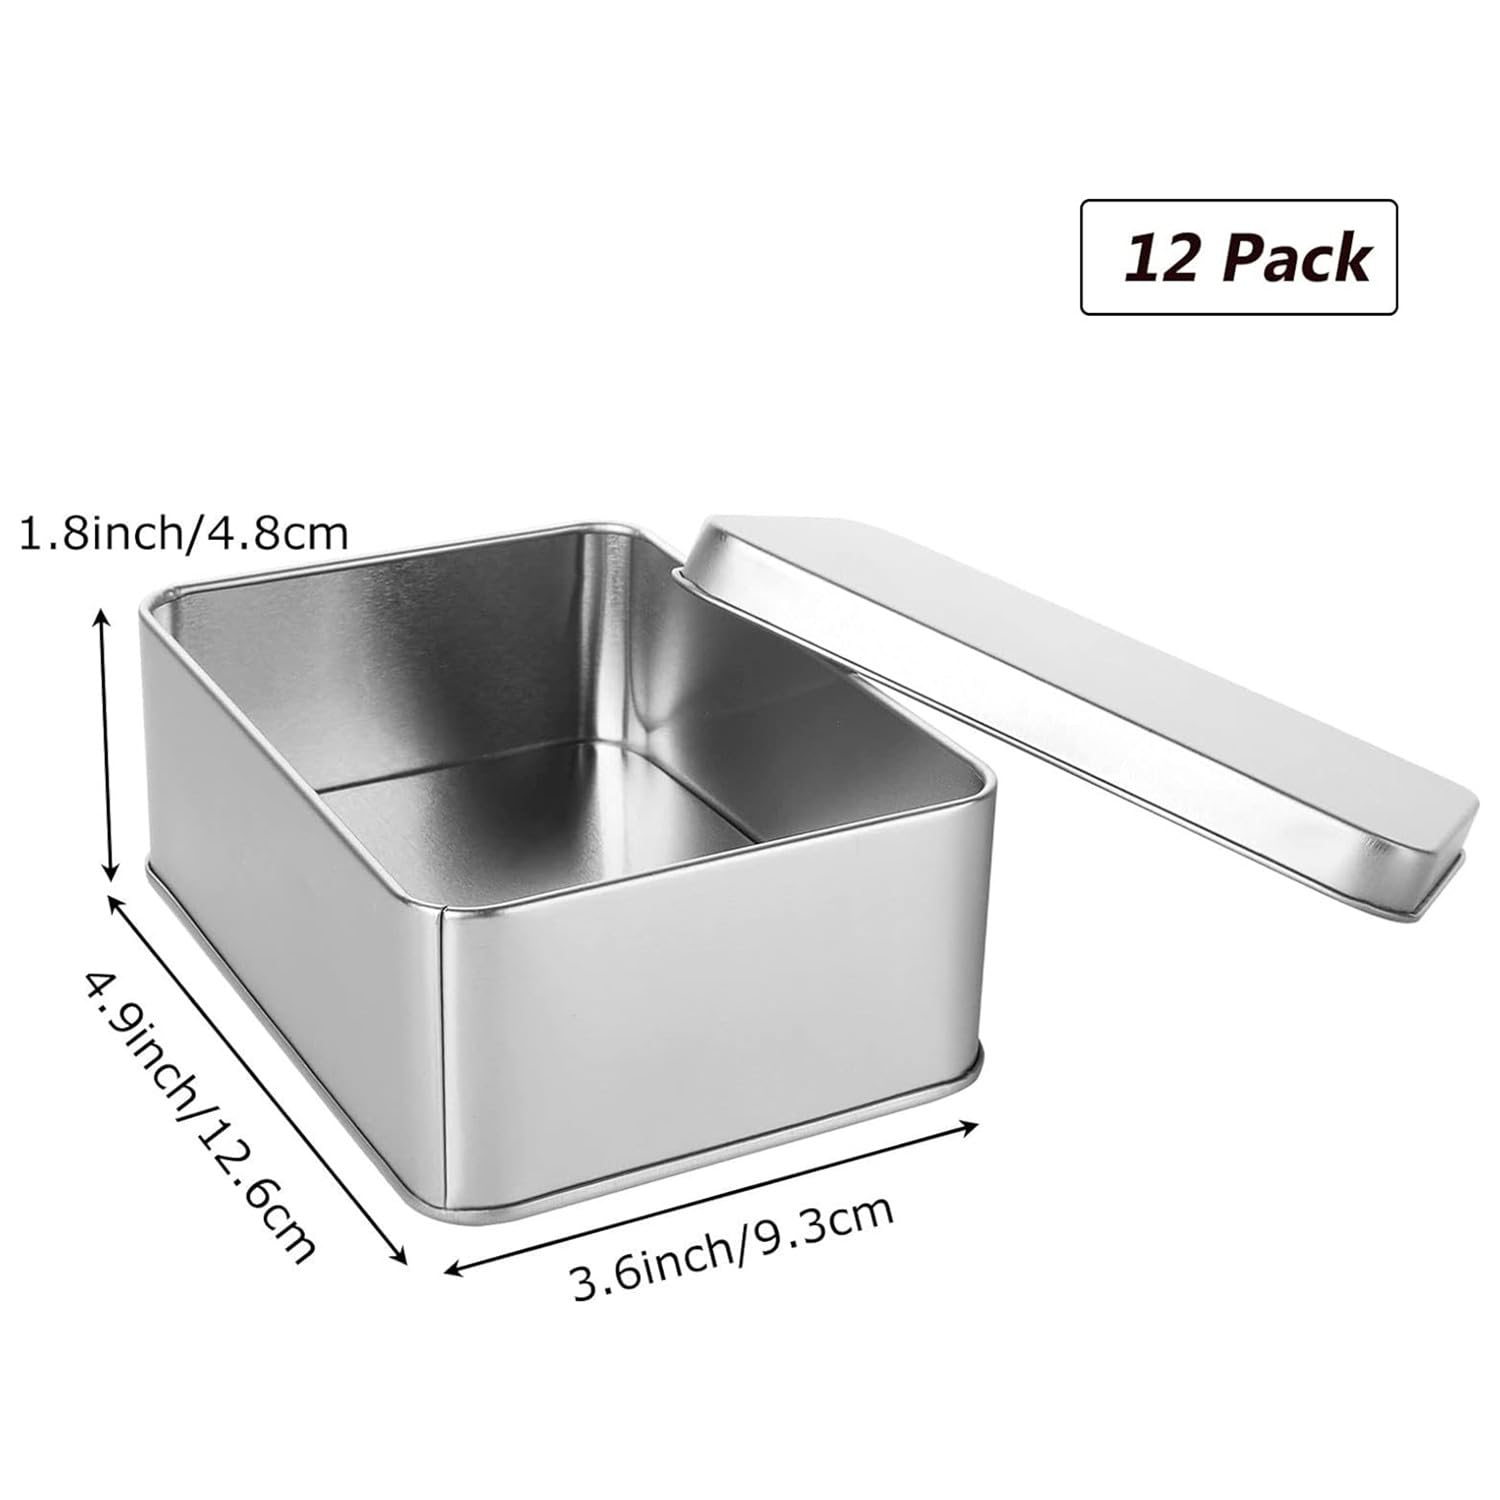 RHBLME 12 Pack Silver Metal Rectangular Tin Box Lids, 4.9" x 3.6" x 1.8" Large Containers Cookie Tins with Lids, Holder for Keeping Car Keys, Cookie, Pencil Case, and More